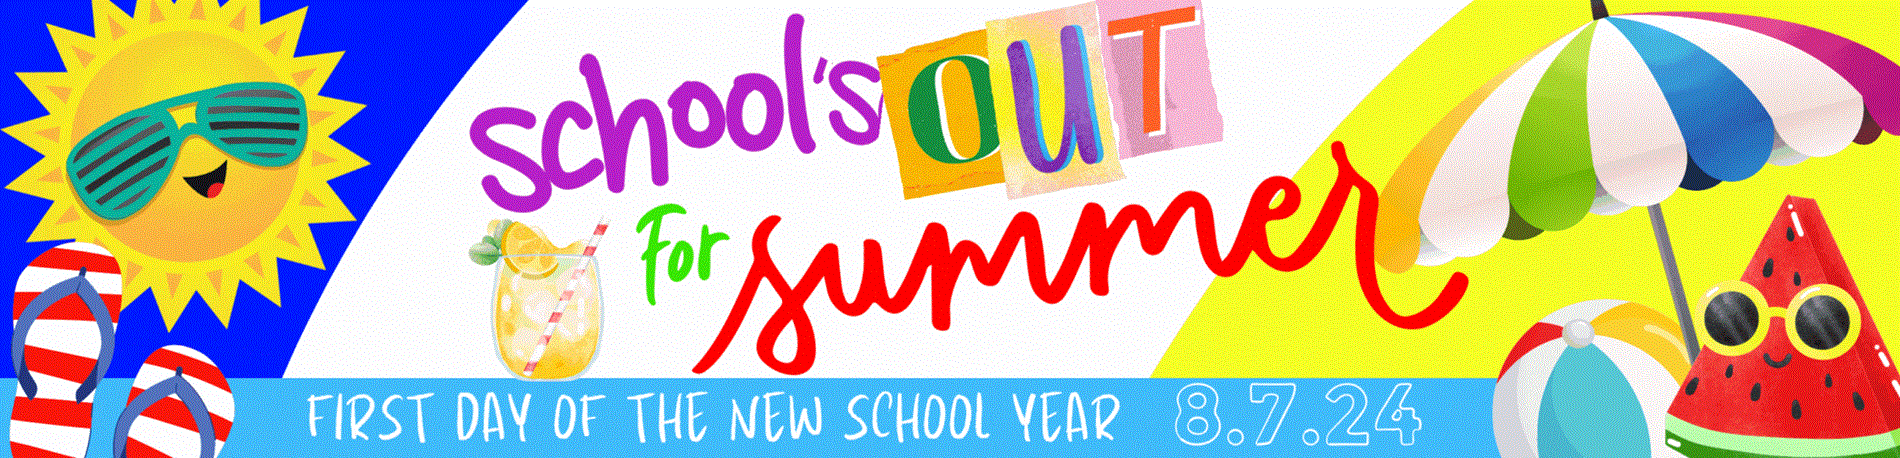 School's out for summer Announcement